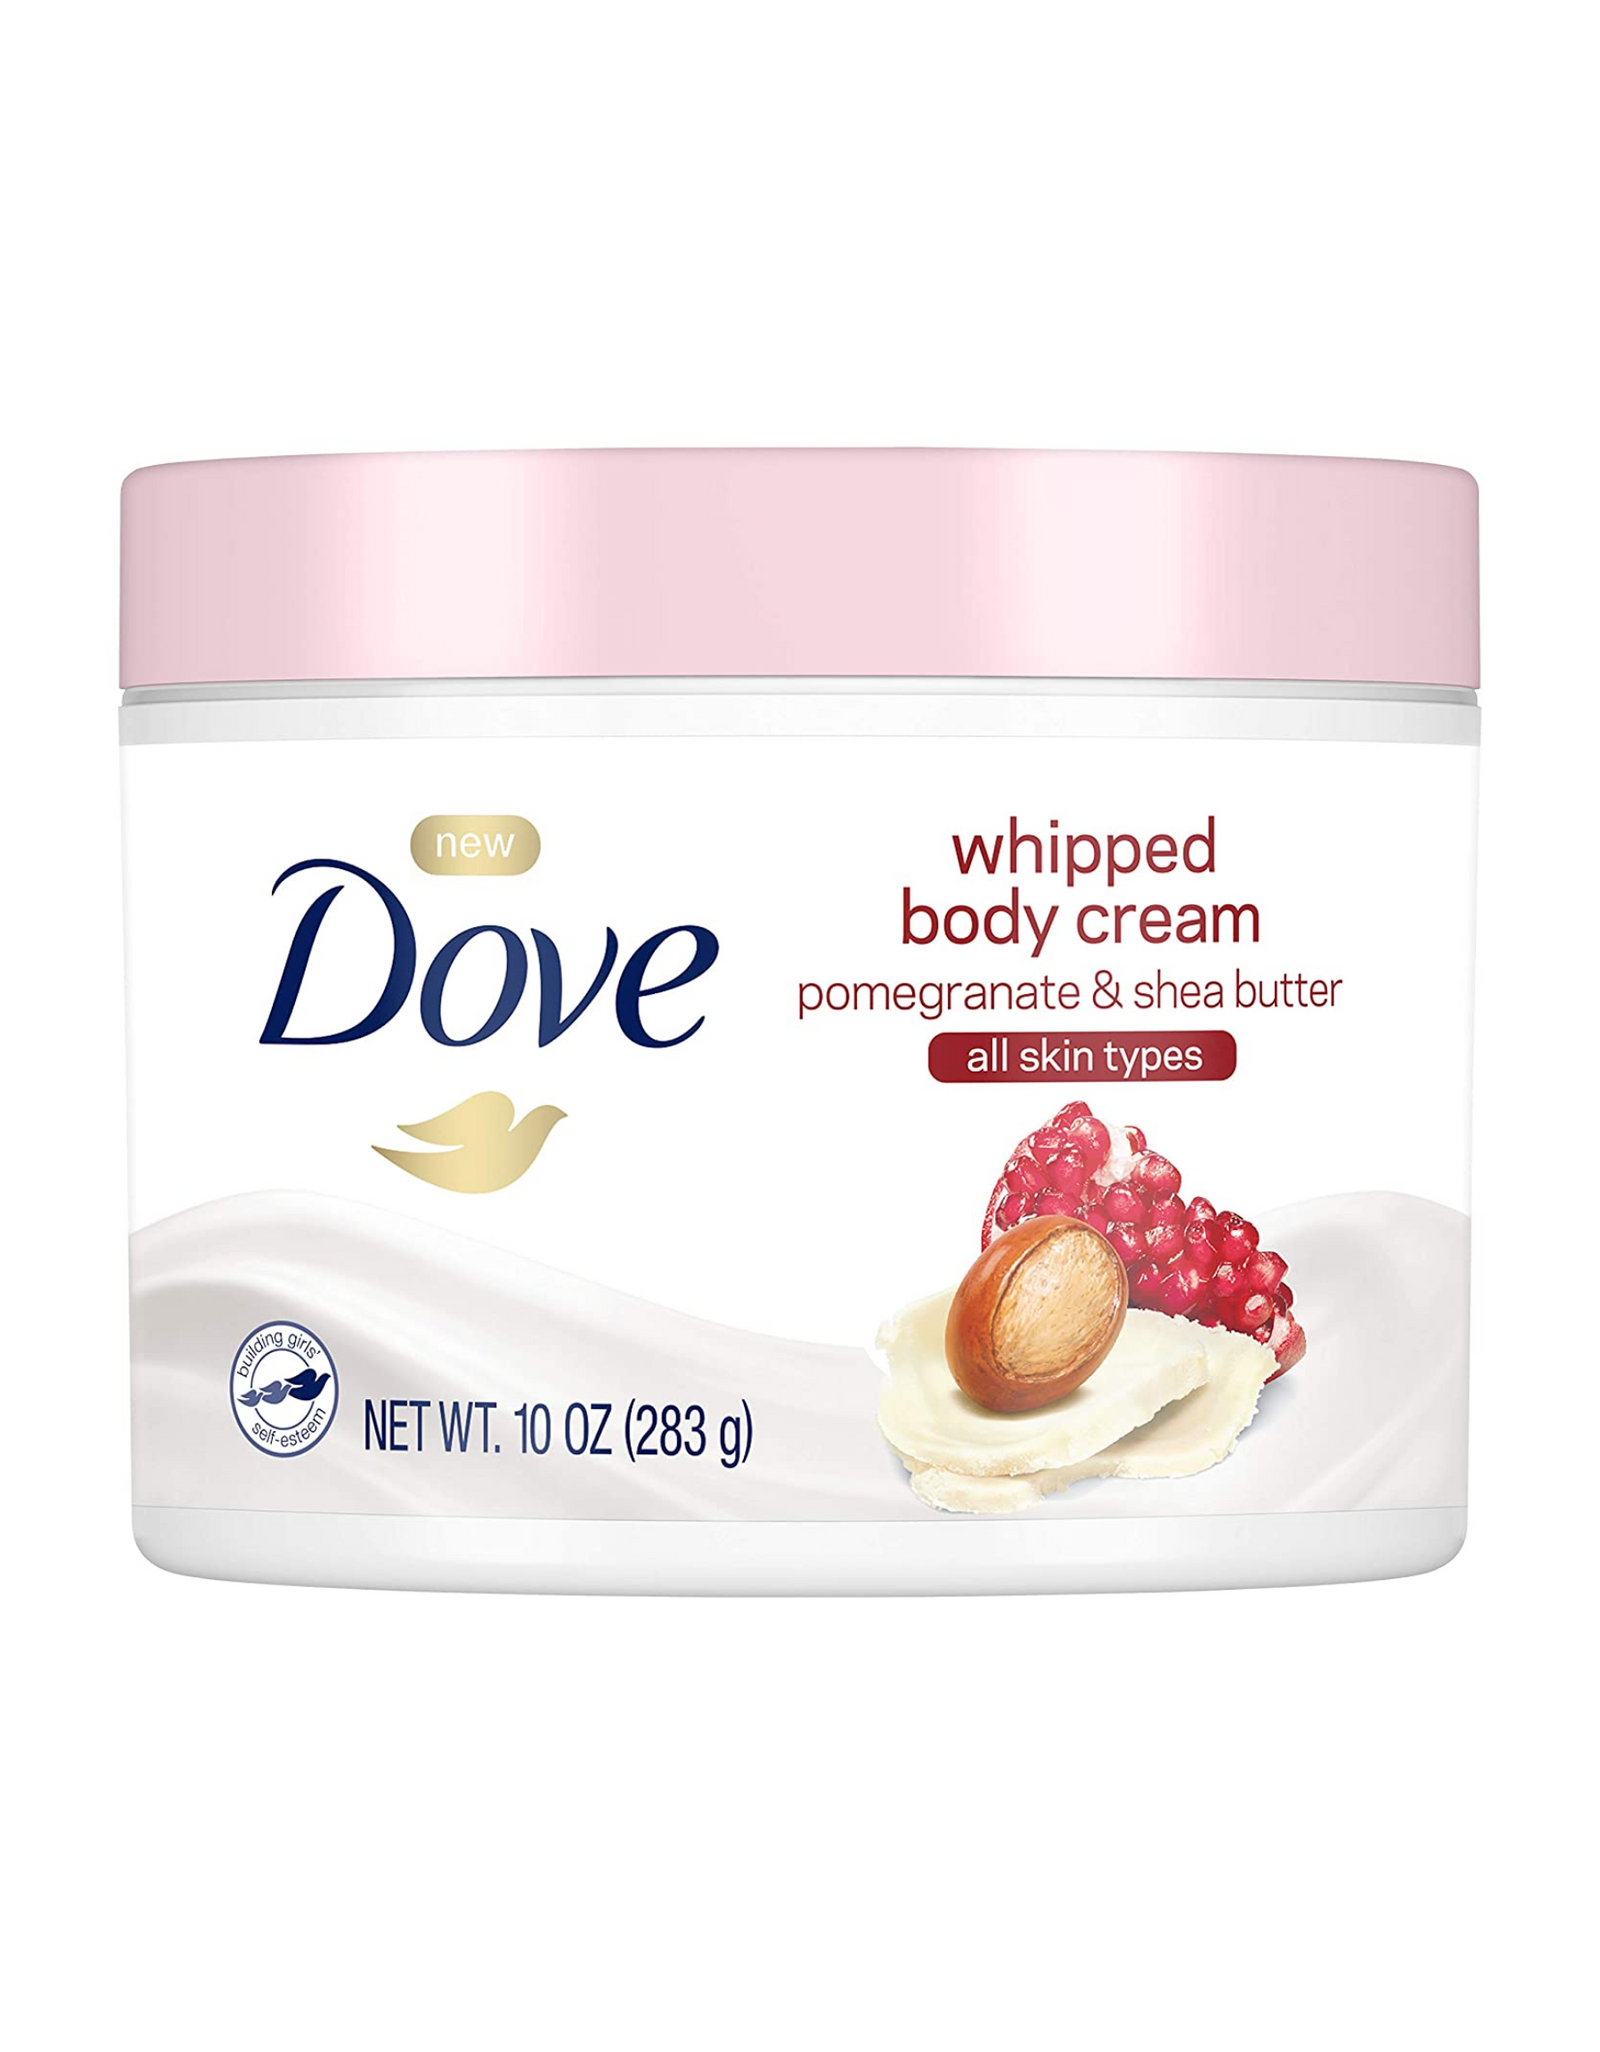 Dove Whipped Body Cream, Pomegranate and Shea, for All Skin Types, 10 Oz